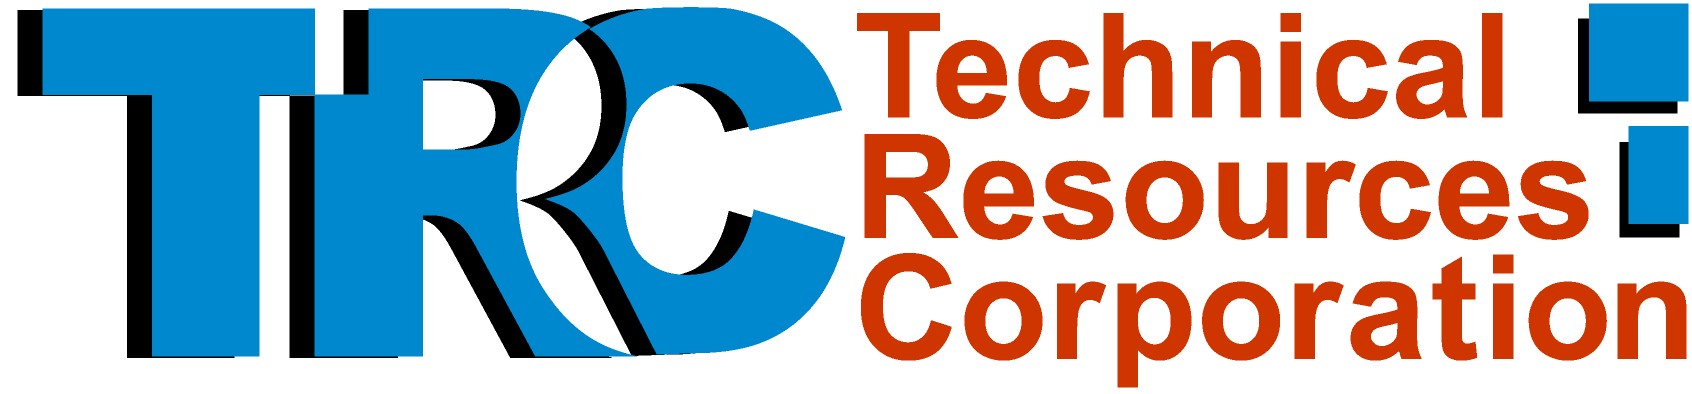 Technical Resources Corporation